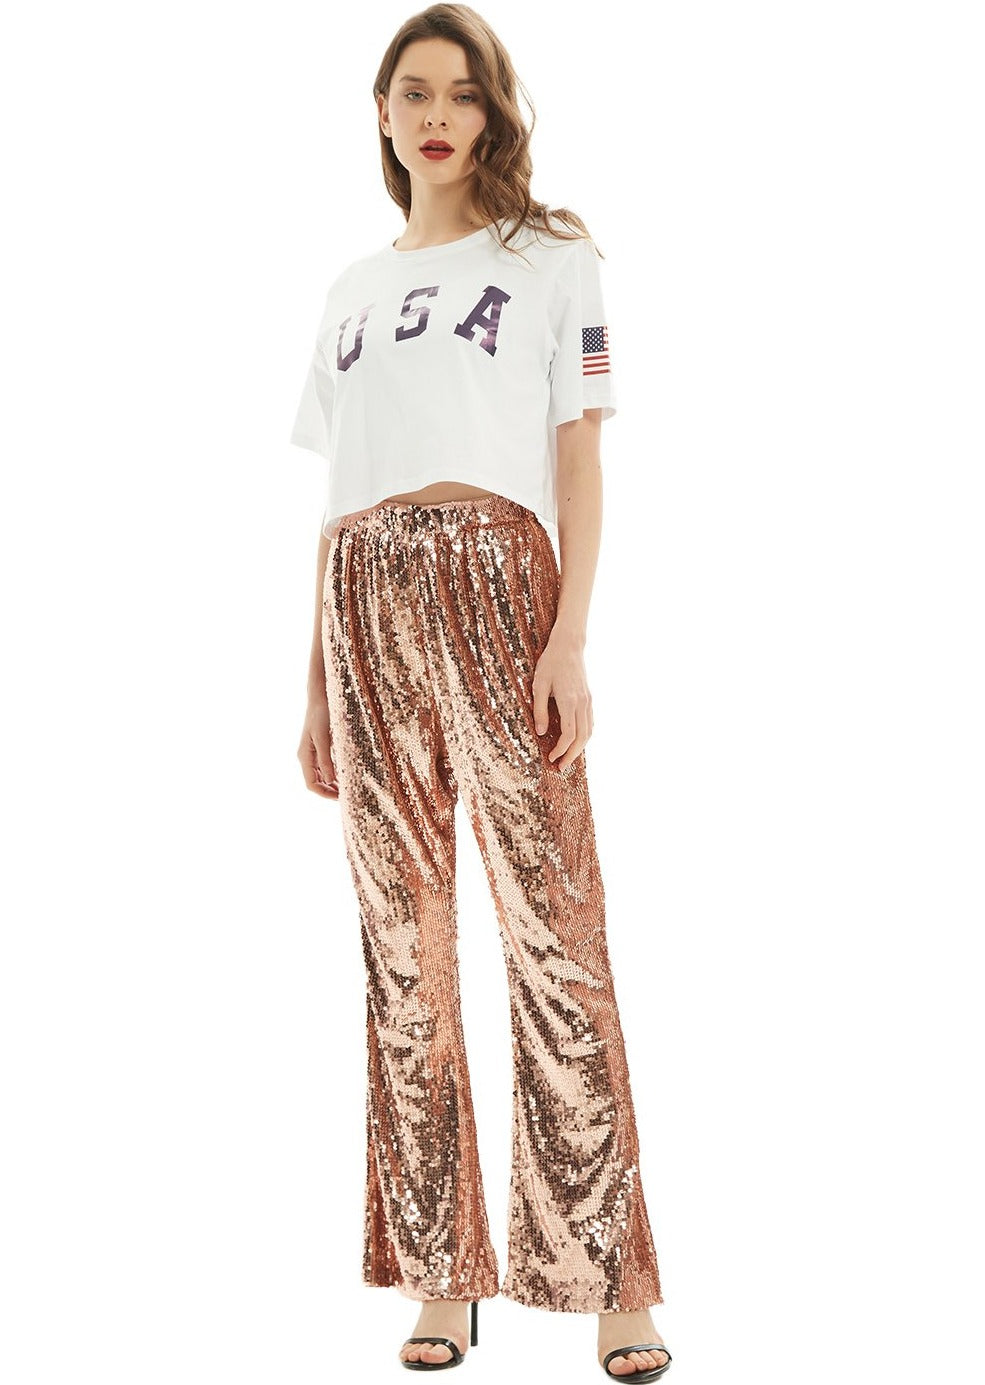 Metallic Disco Pants For Men Shiny Sequined Flared Elastic Waist For Party,  Club, Rave, Dancing Performance Costume From Yansuhuan, $13.62 | DHgate.Com